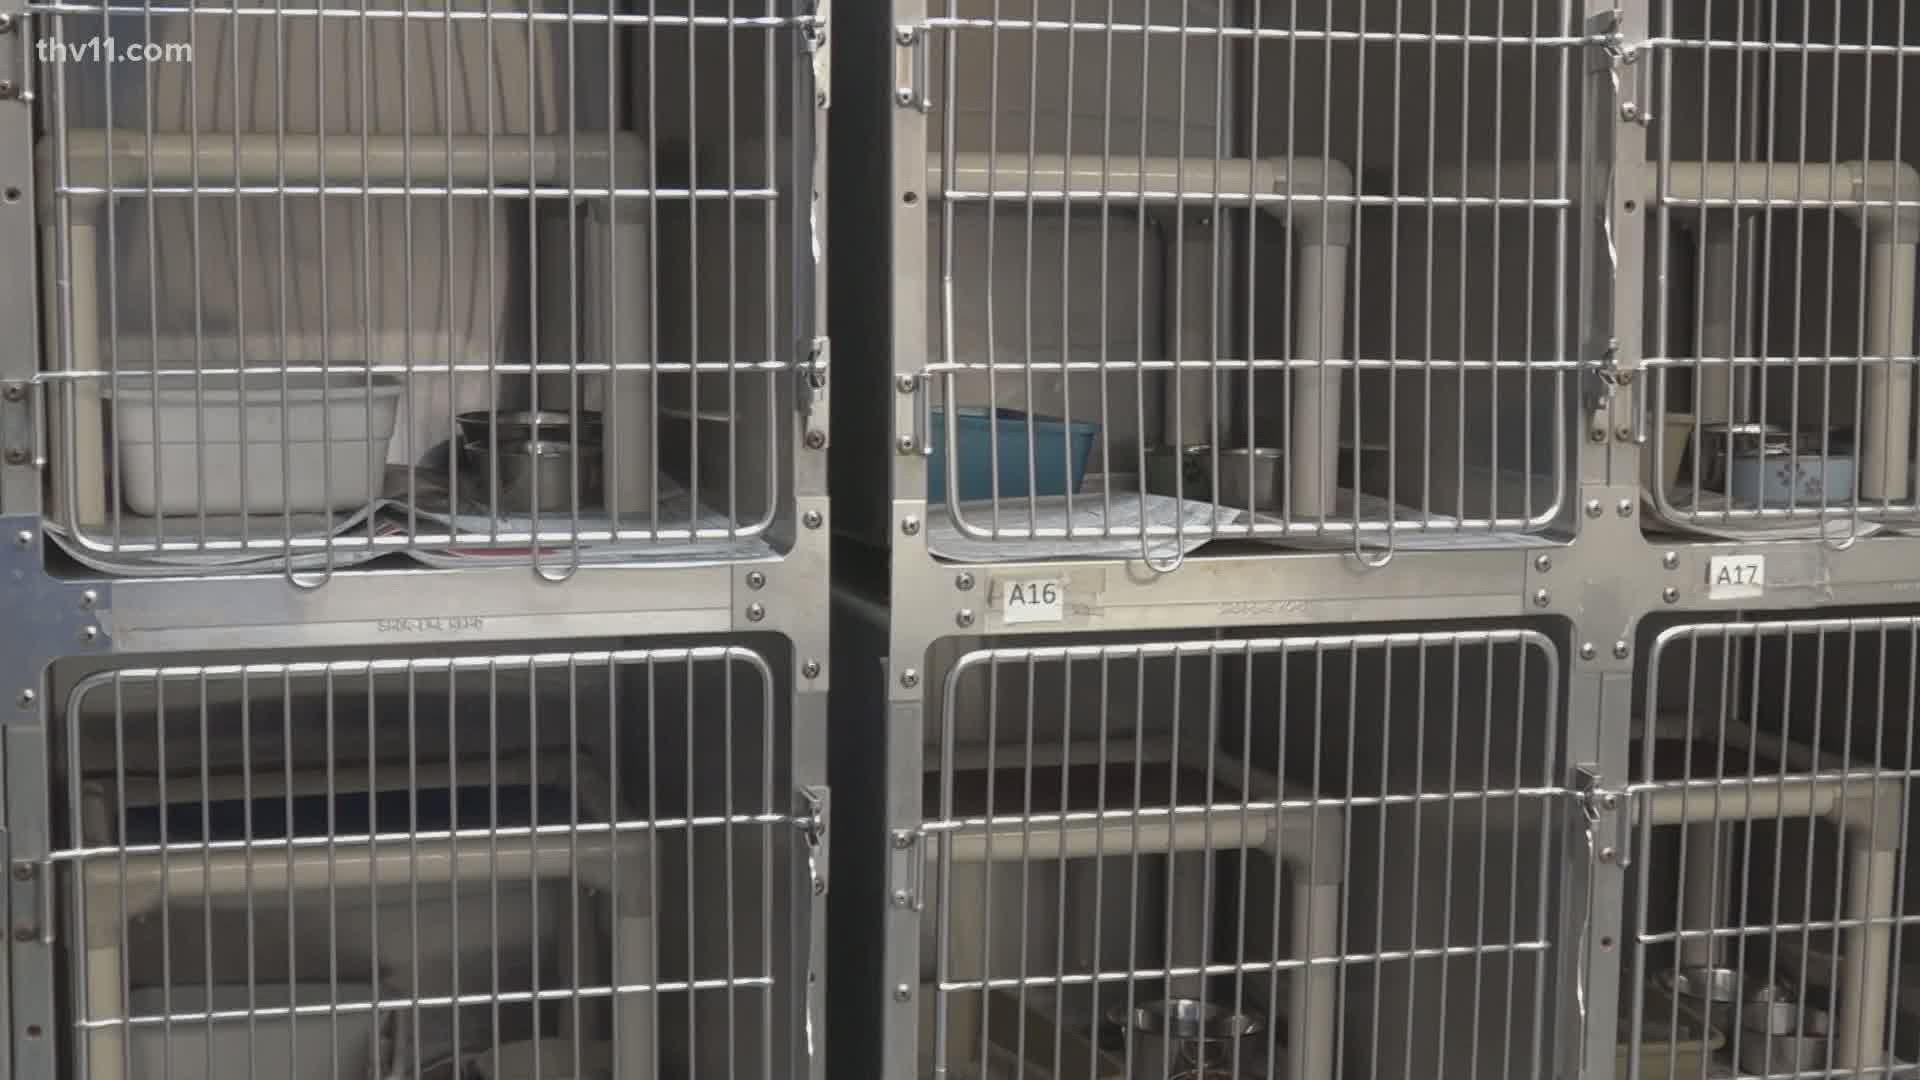 All animals adopted from North Little Rock animal shelter 